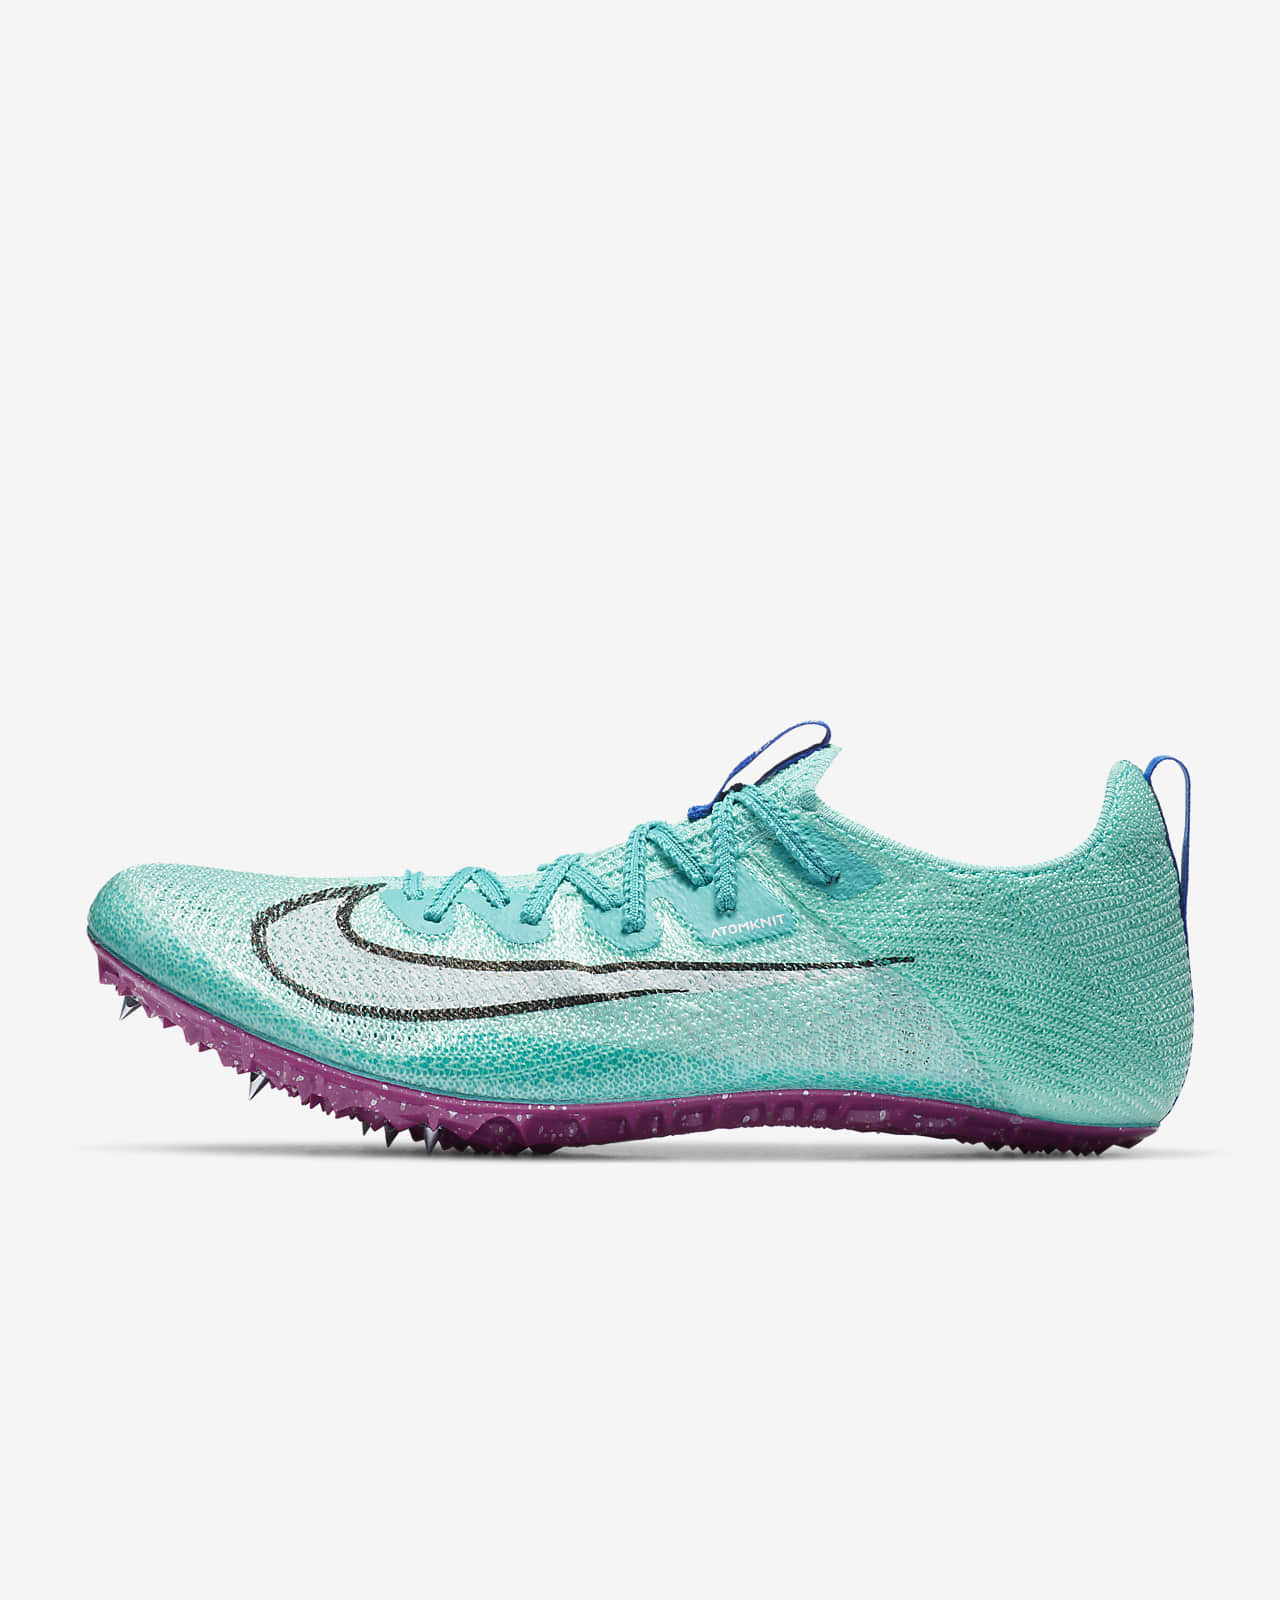 Spikes Nike Zoom Sale Online, SAVE 46% mpgc.net